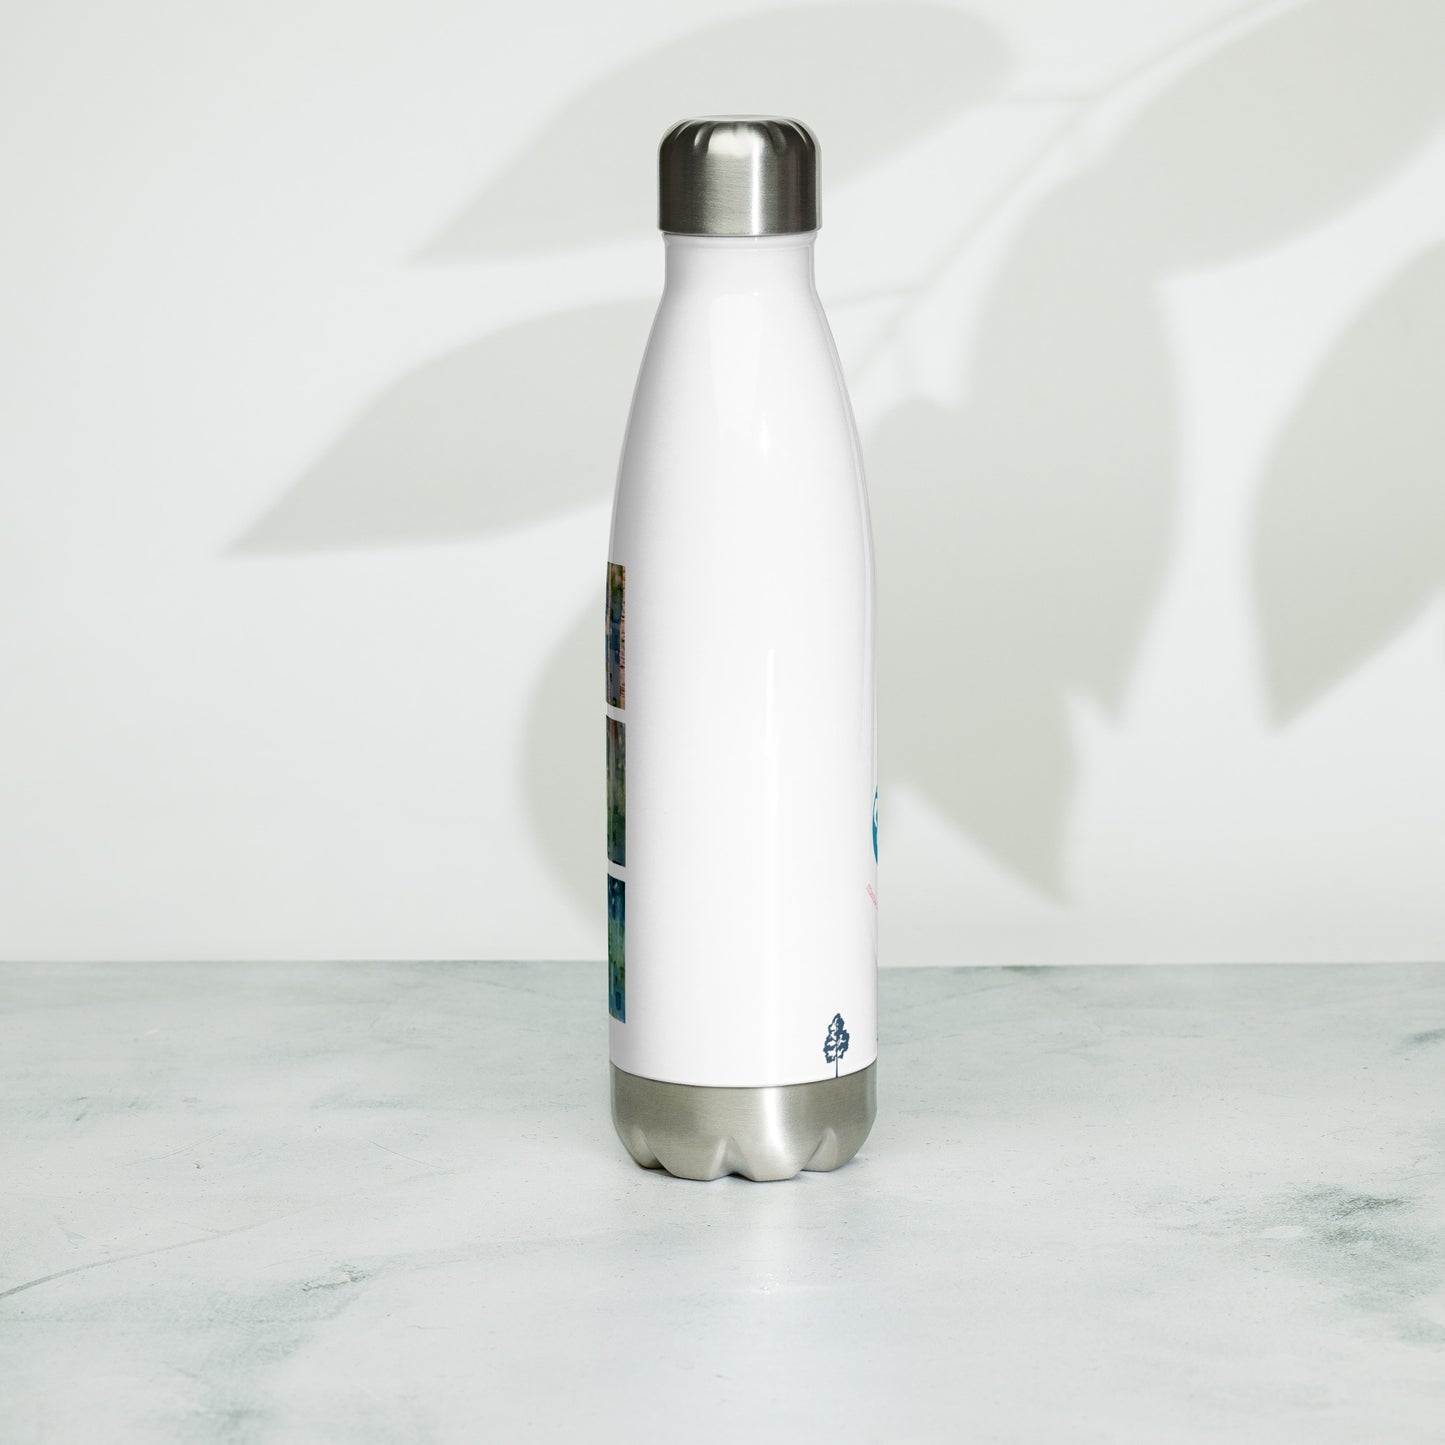 Stainless Steel Water Bottle - Dandelions and Birches